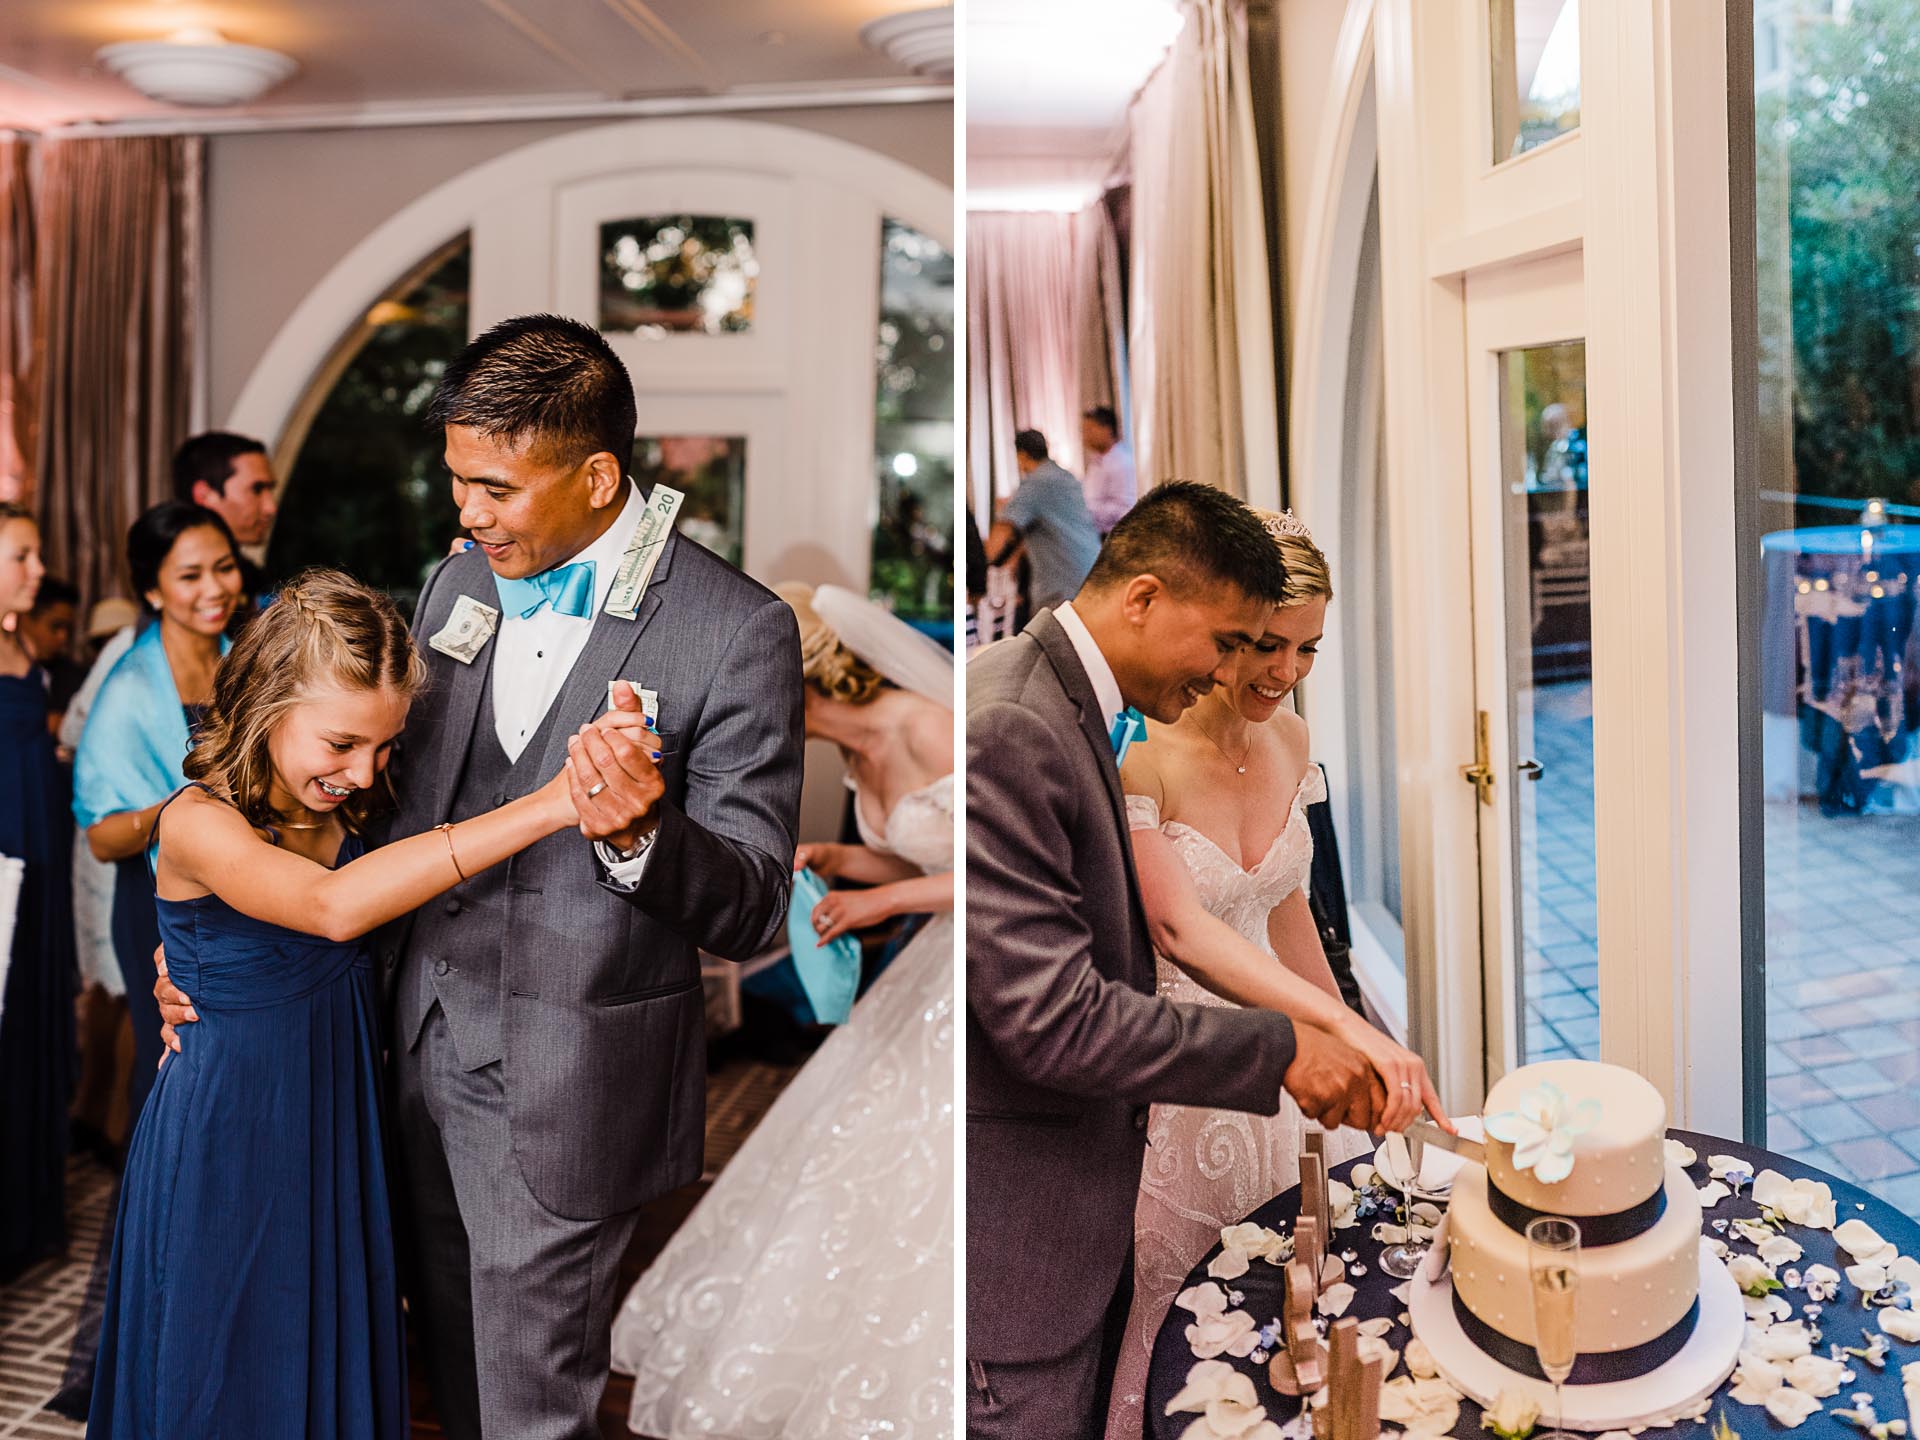 Shelly and Ken Wedding in Redwood City and Garden Court Hotel in Palo Alto CA - cake cutting